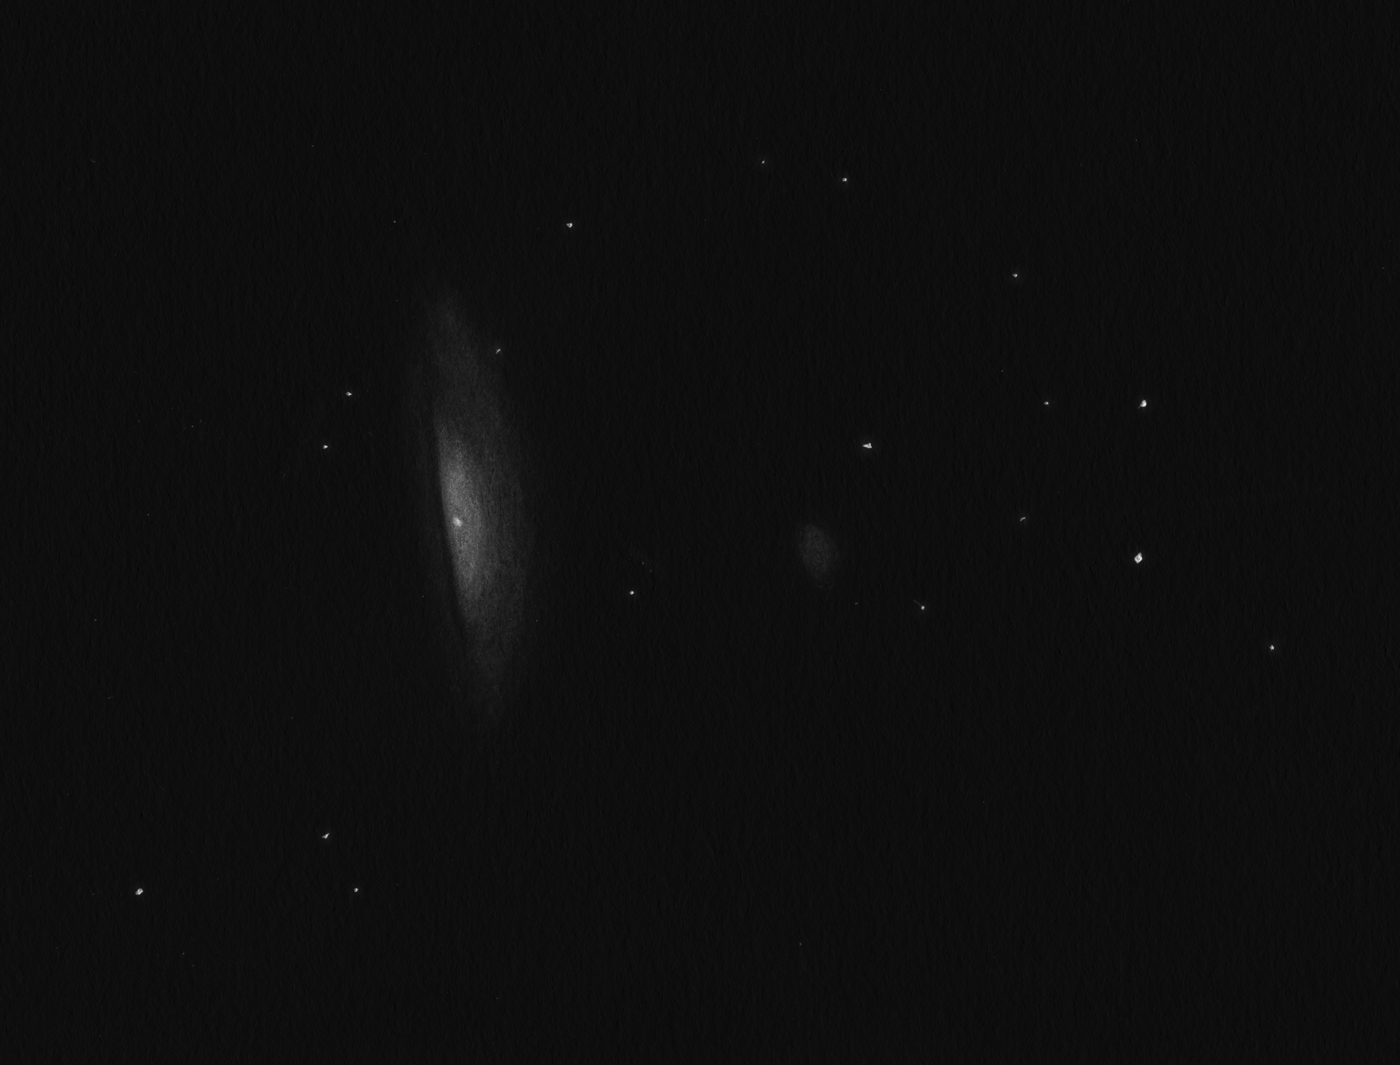 NGC_7331_2020-09-08_21-00_T400x166x218_gbe_small.png.dac559272573a1775aa7b3180edef792.png